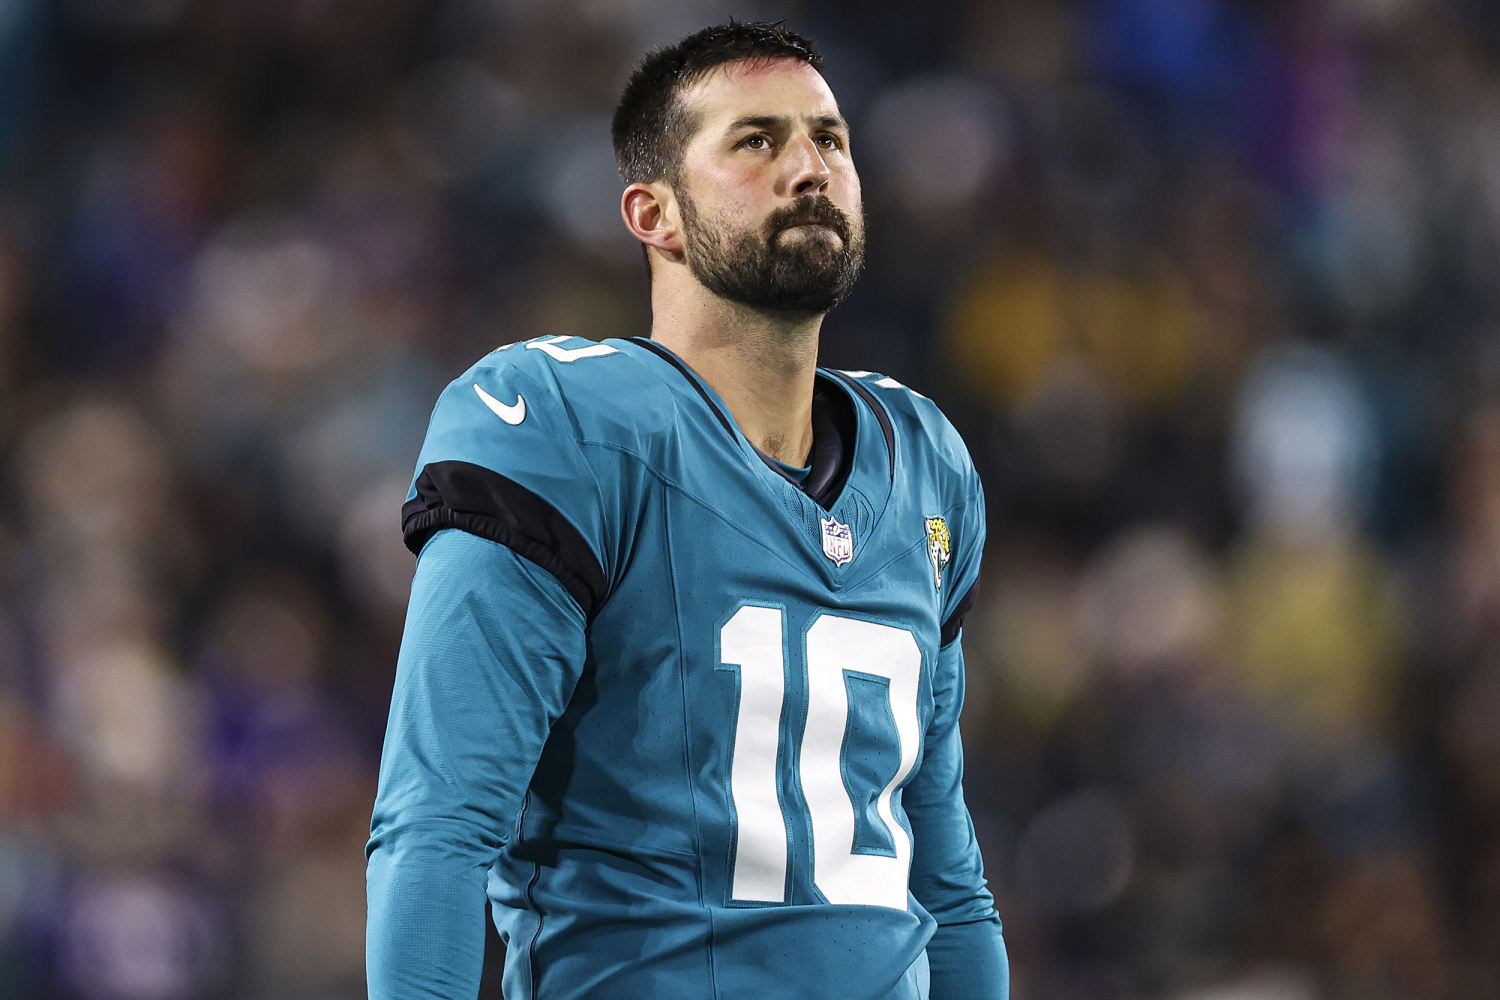 Kicker Brandon McManus released by Commanders amid sexual assault accusations